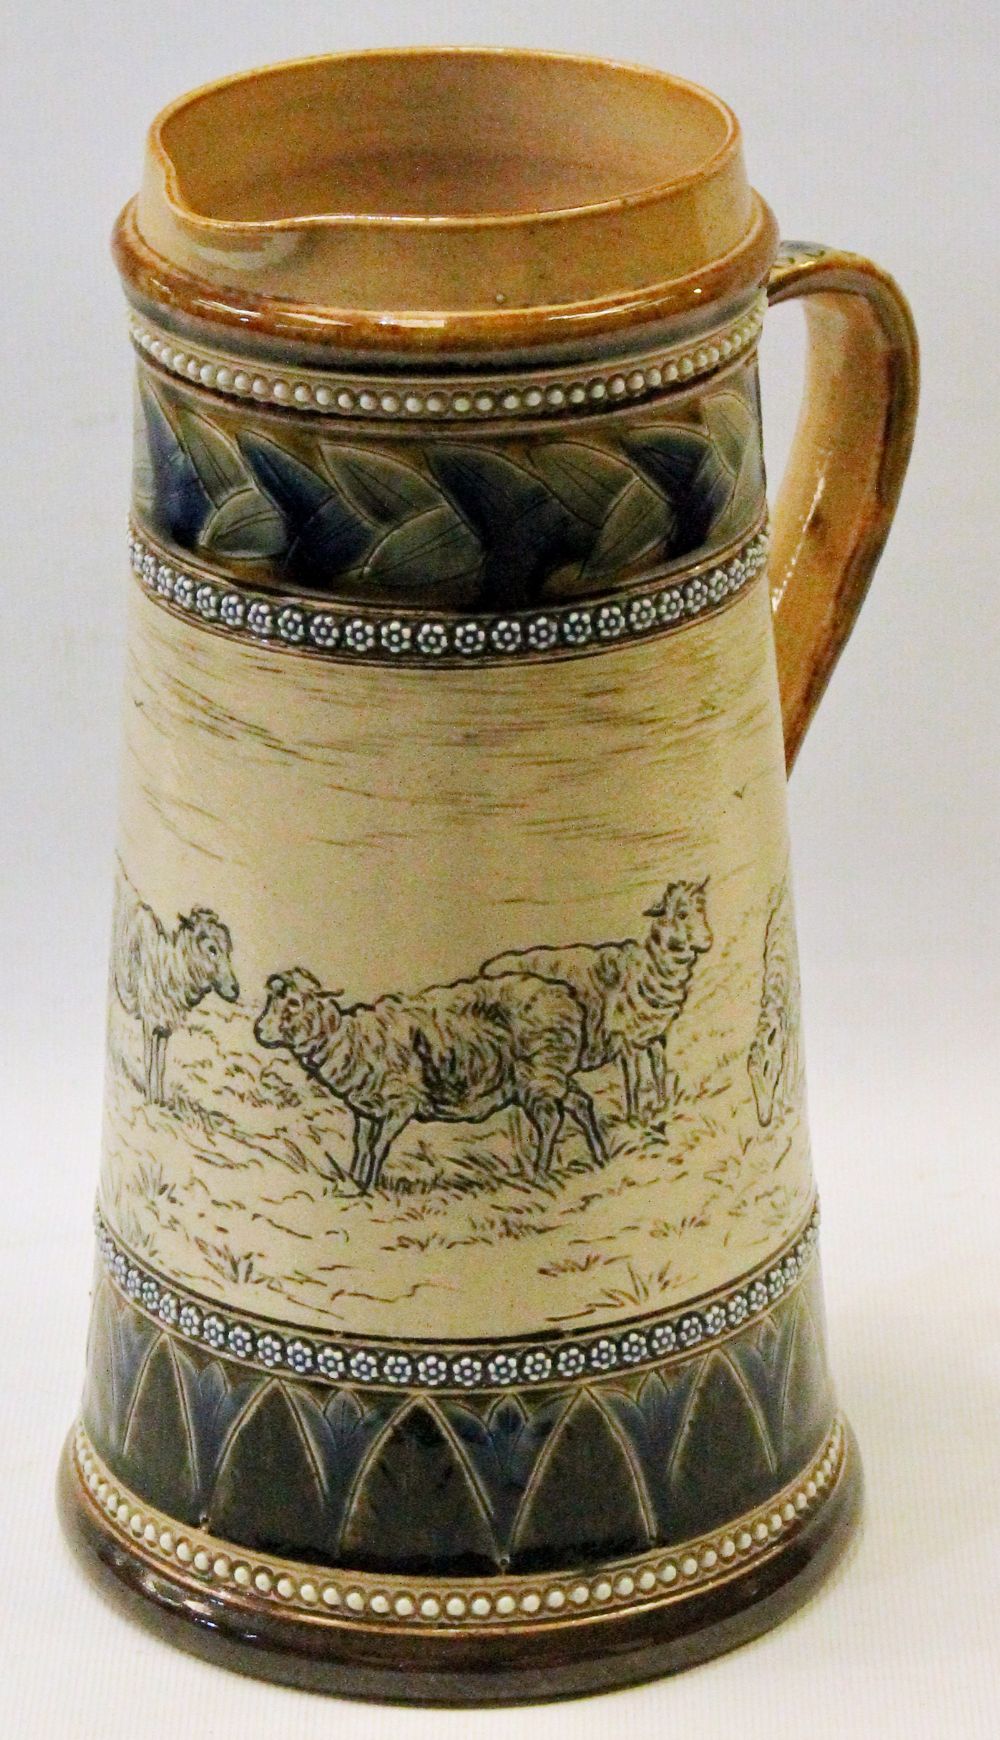 Doulton Lambeth stoneware jug by Hannah Barlow, the top with decorated border and the bottom with